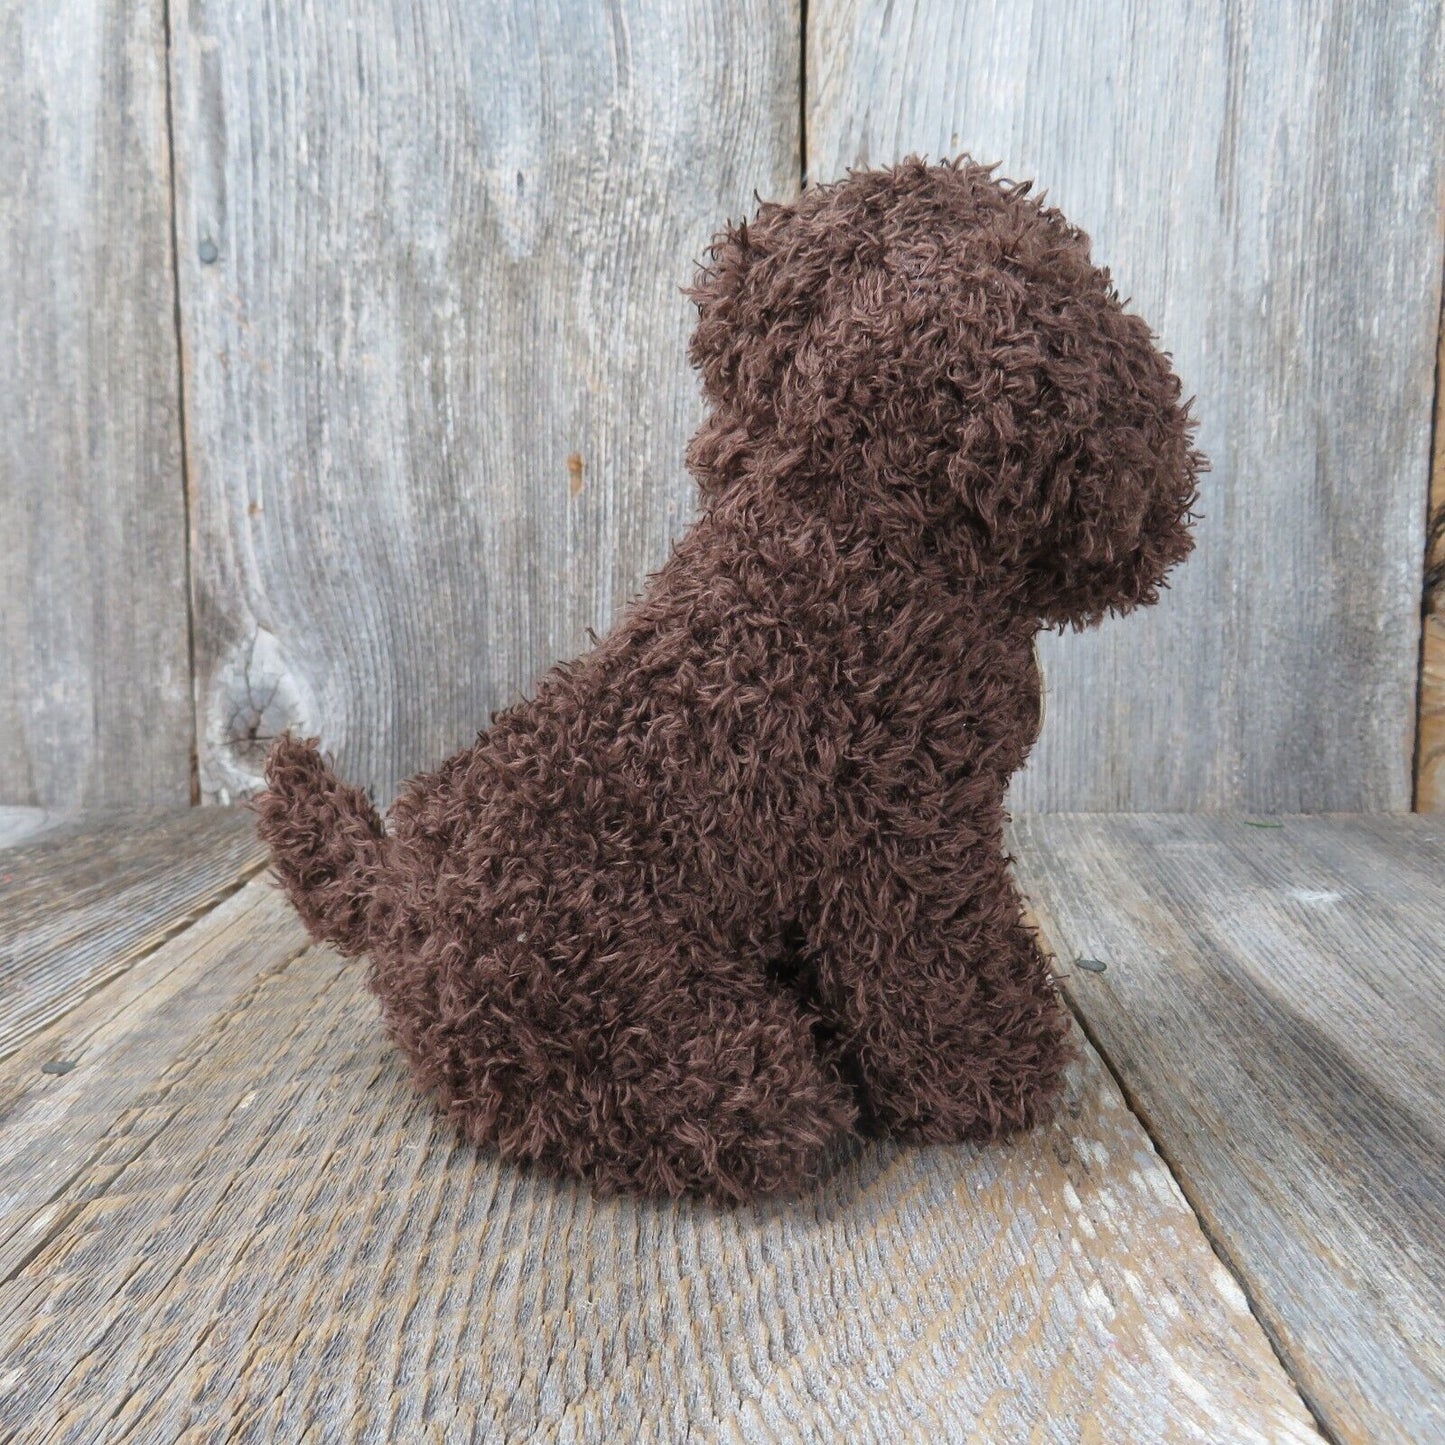 Curly Brown Dog Plush Soft Toy Love Pet Puppy Stuffed Animal Tag Plastic Nose